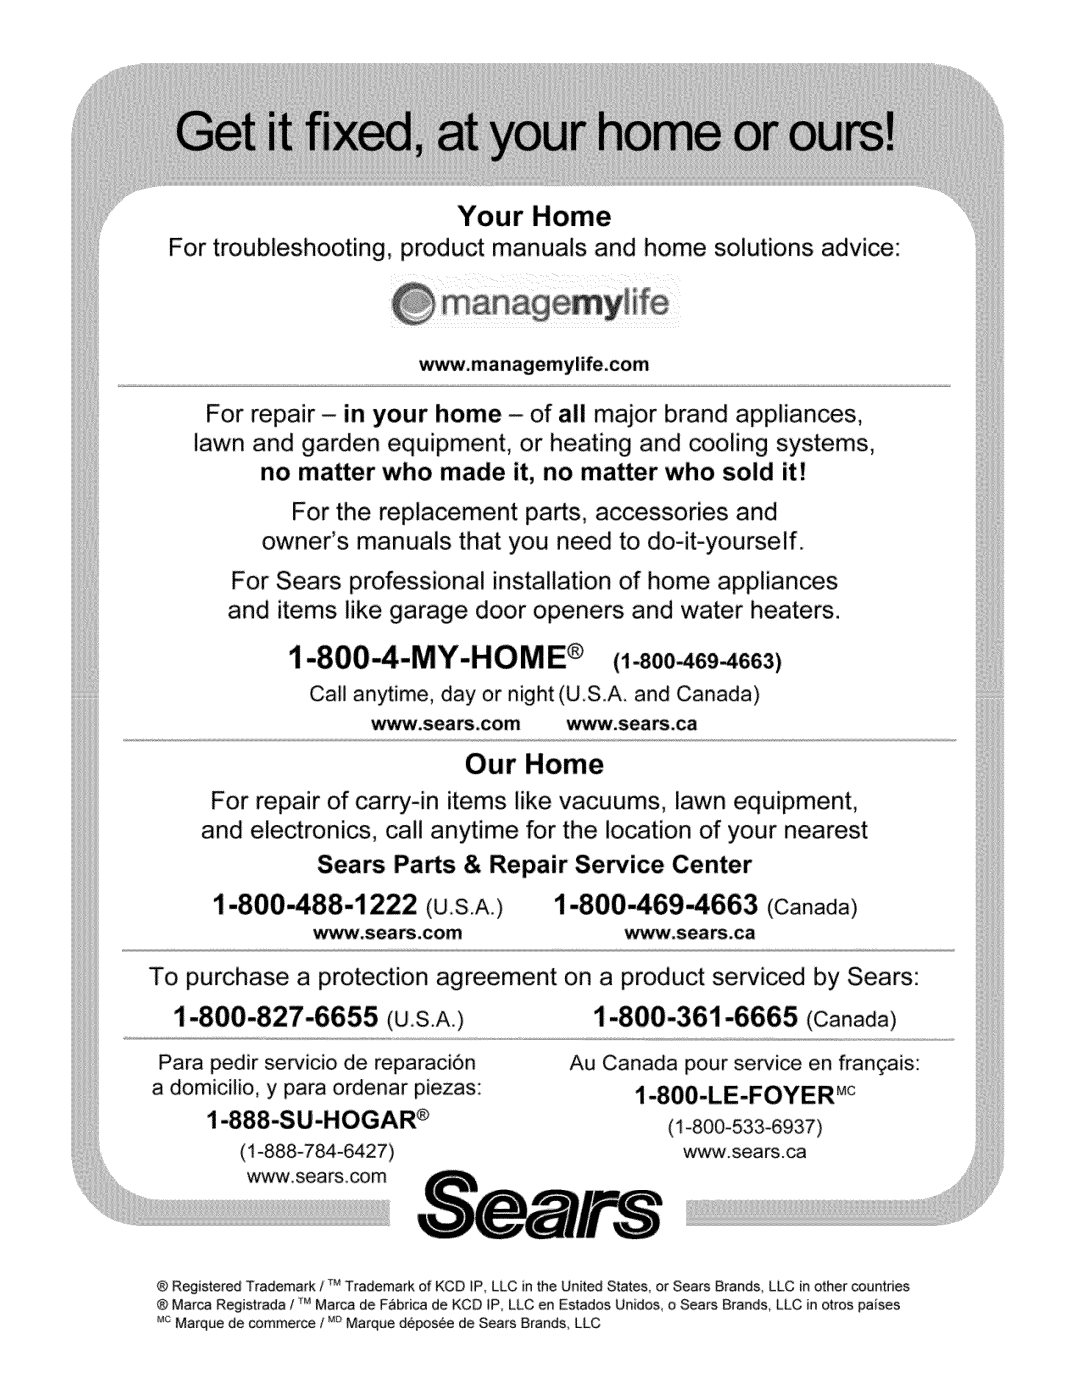 Craftsman 921.16474, 921.16475 Sears Parts & Repair Service Center, My-Home, Your Home, Our Home, Canada, t-800-361-6665 